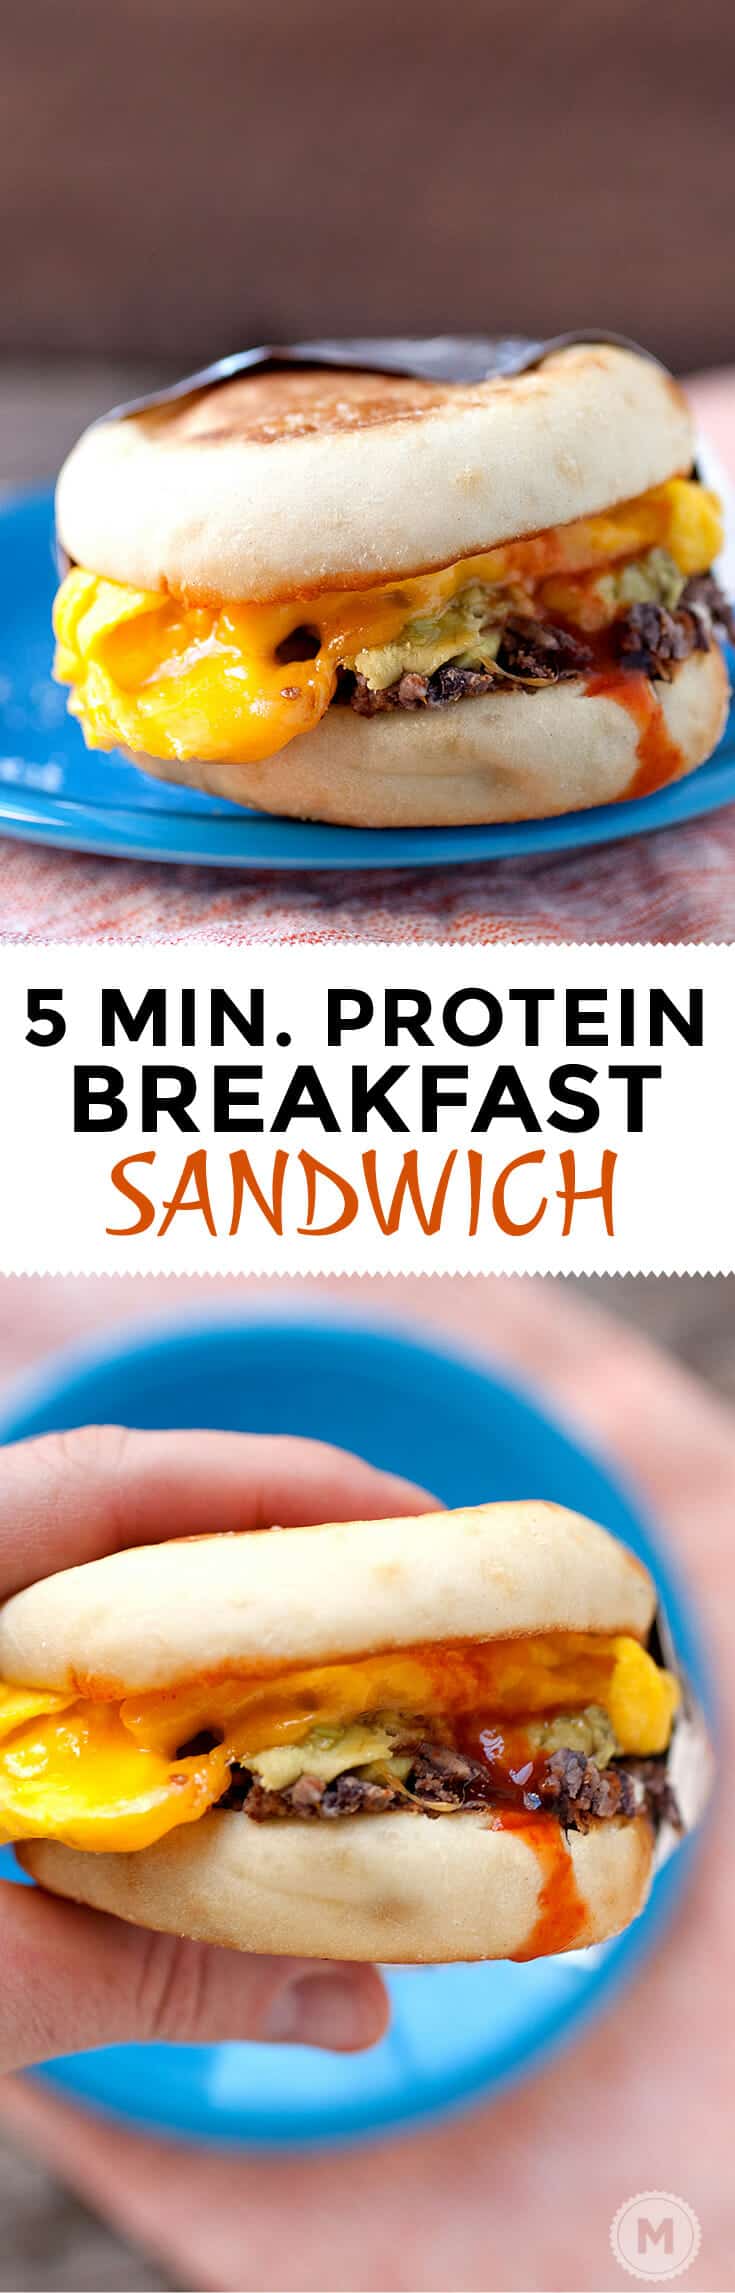 5 Minute Protein Breakfast Sandwich - This quick sandwich can be ready in no time and is packed with protein and good fats to kick your day off. Wrap it up and eat it on the go and skip the drive through lane! | macheesmo.com